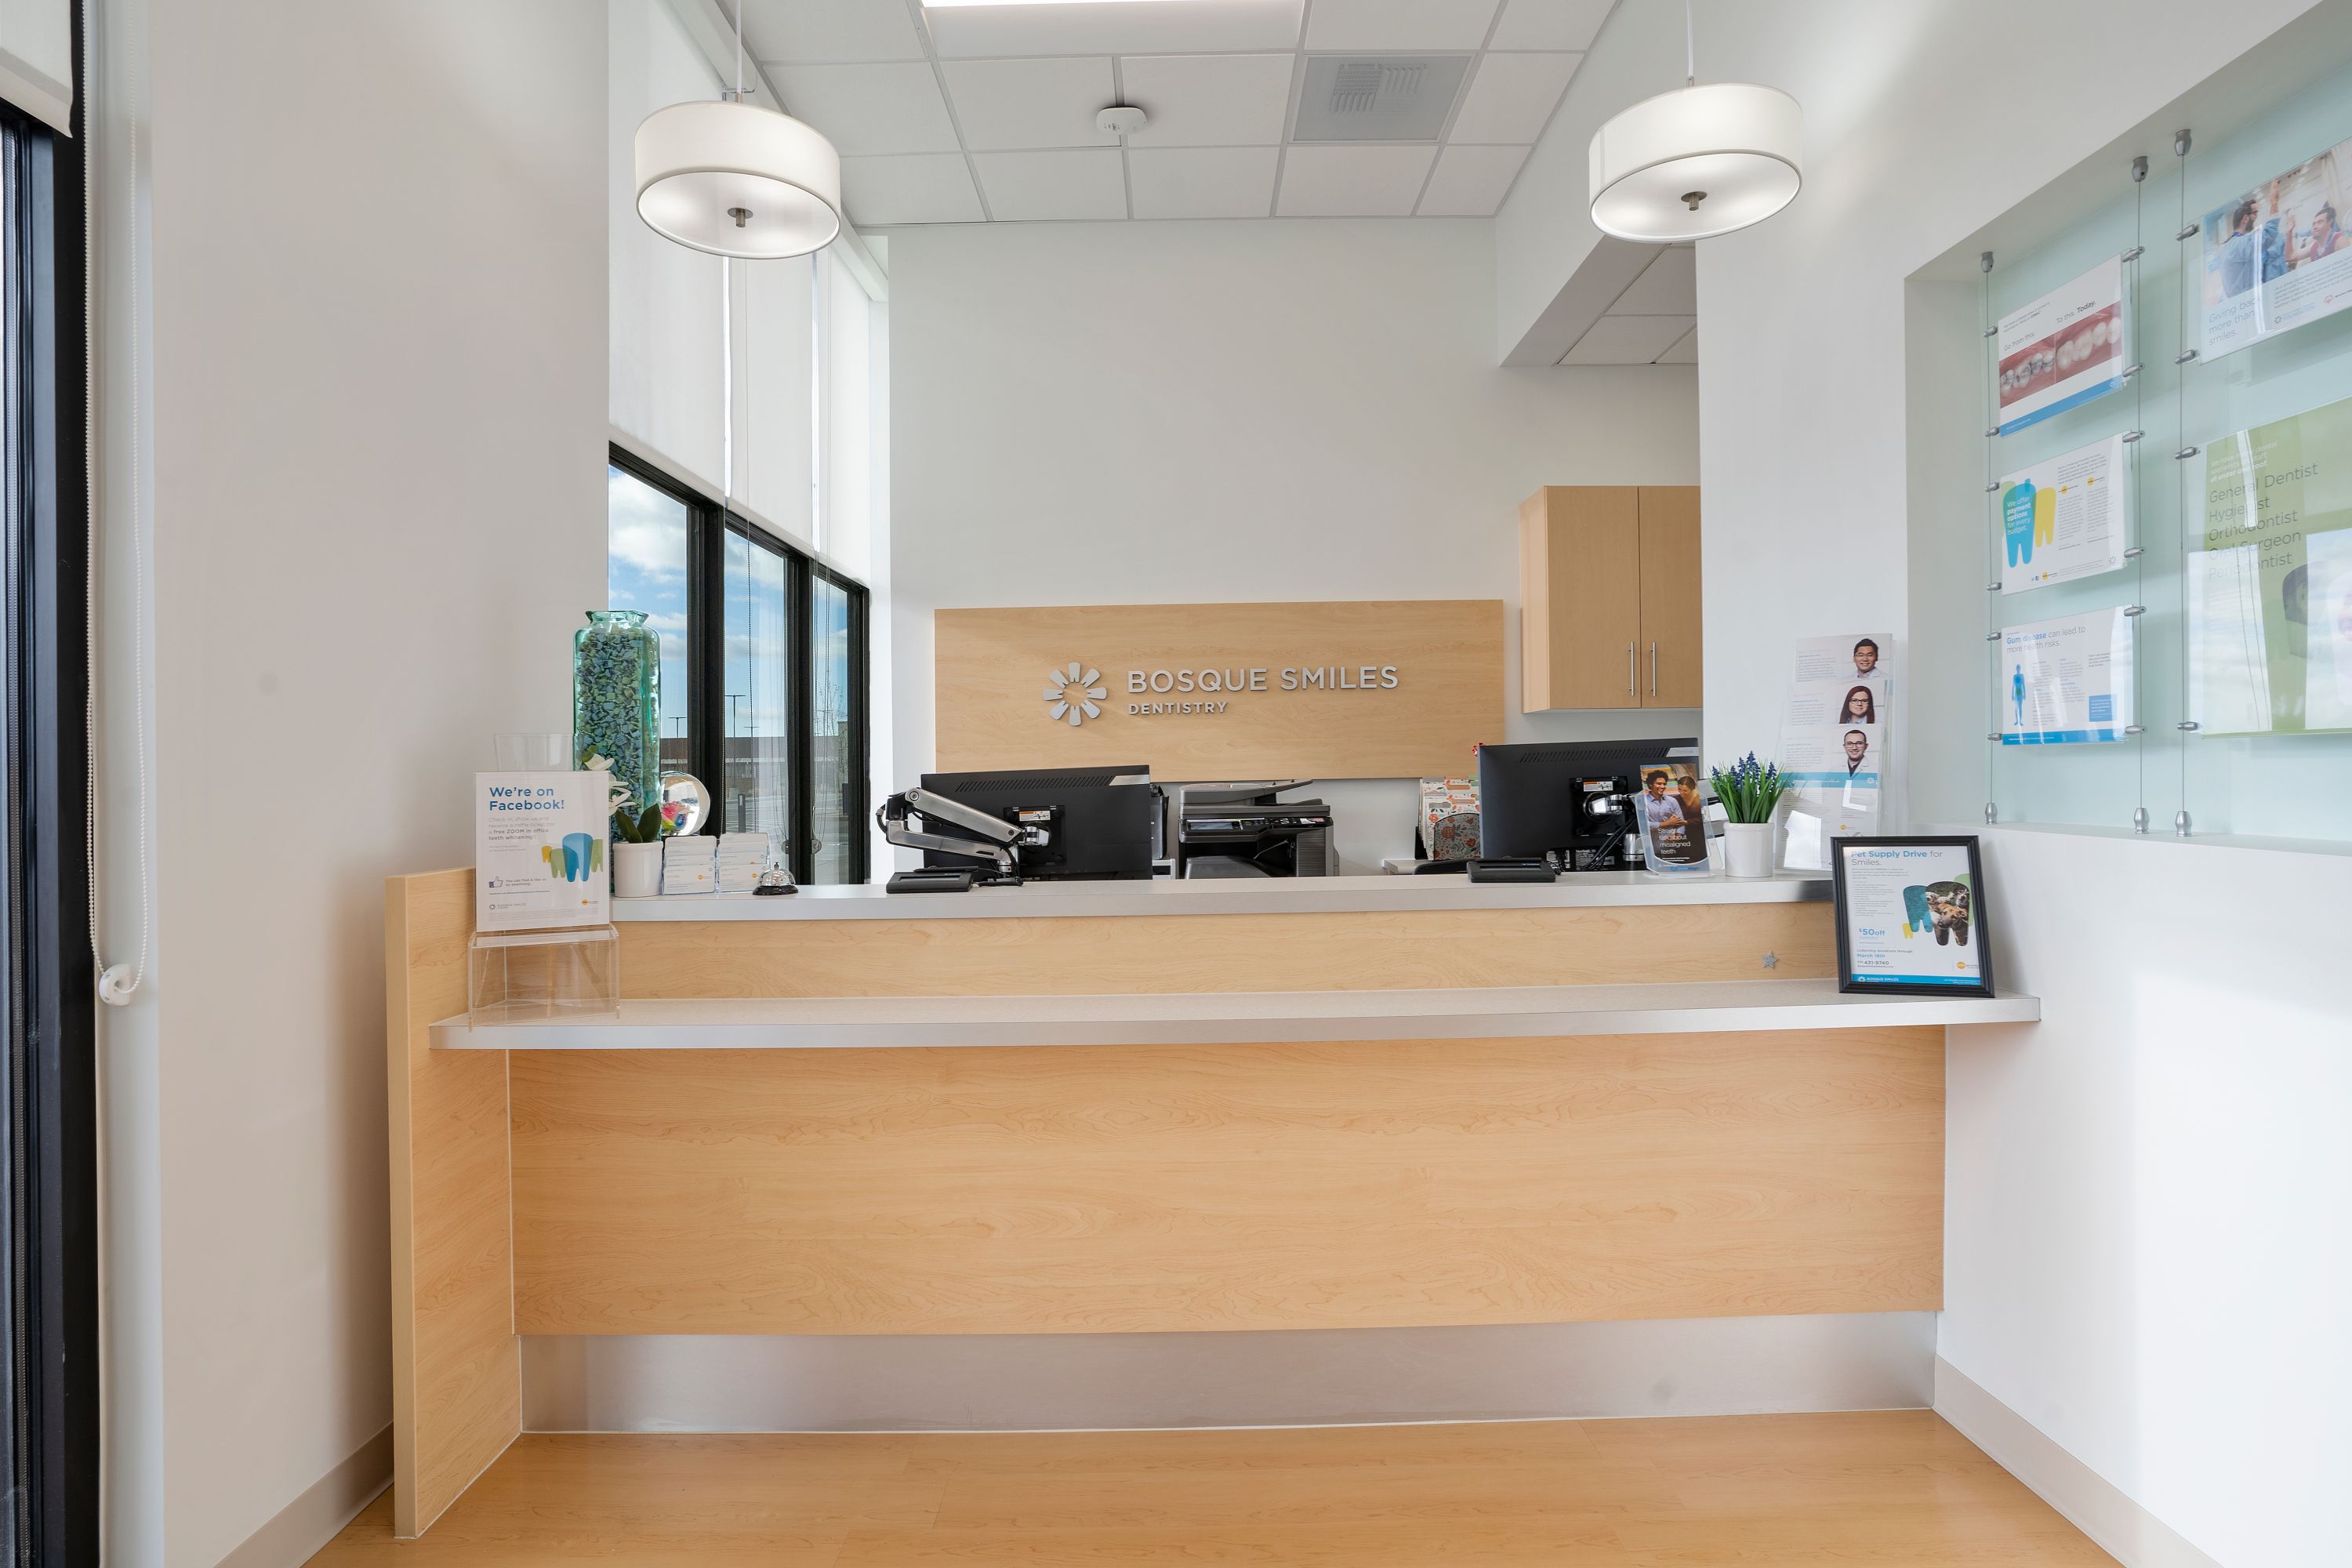 Bosque Smiles Dentistry opened its doors to the Albuquerque community in December 2019!